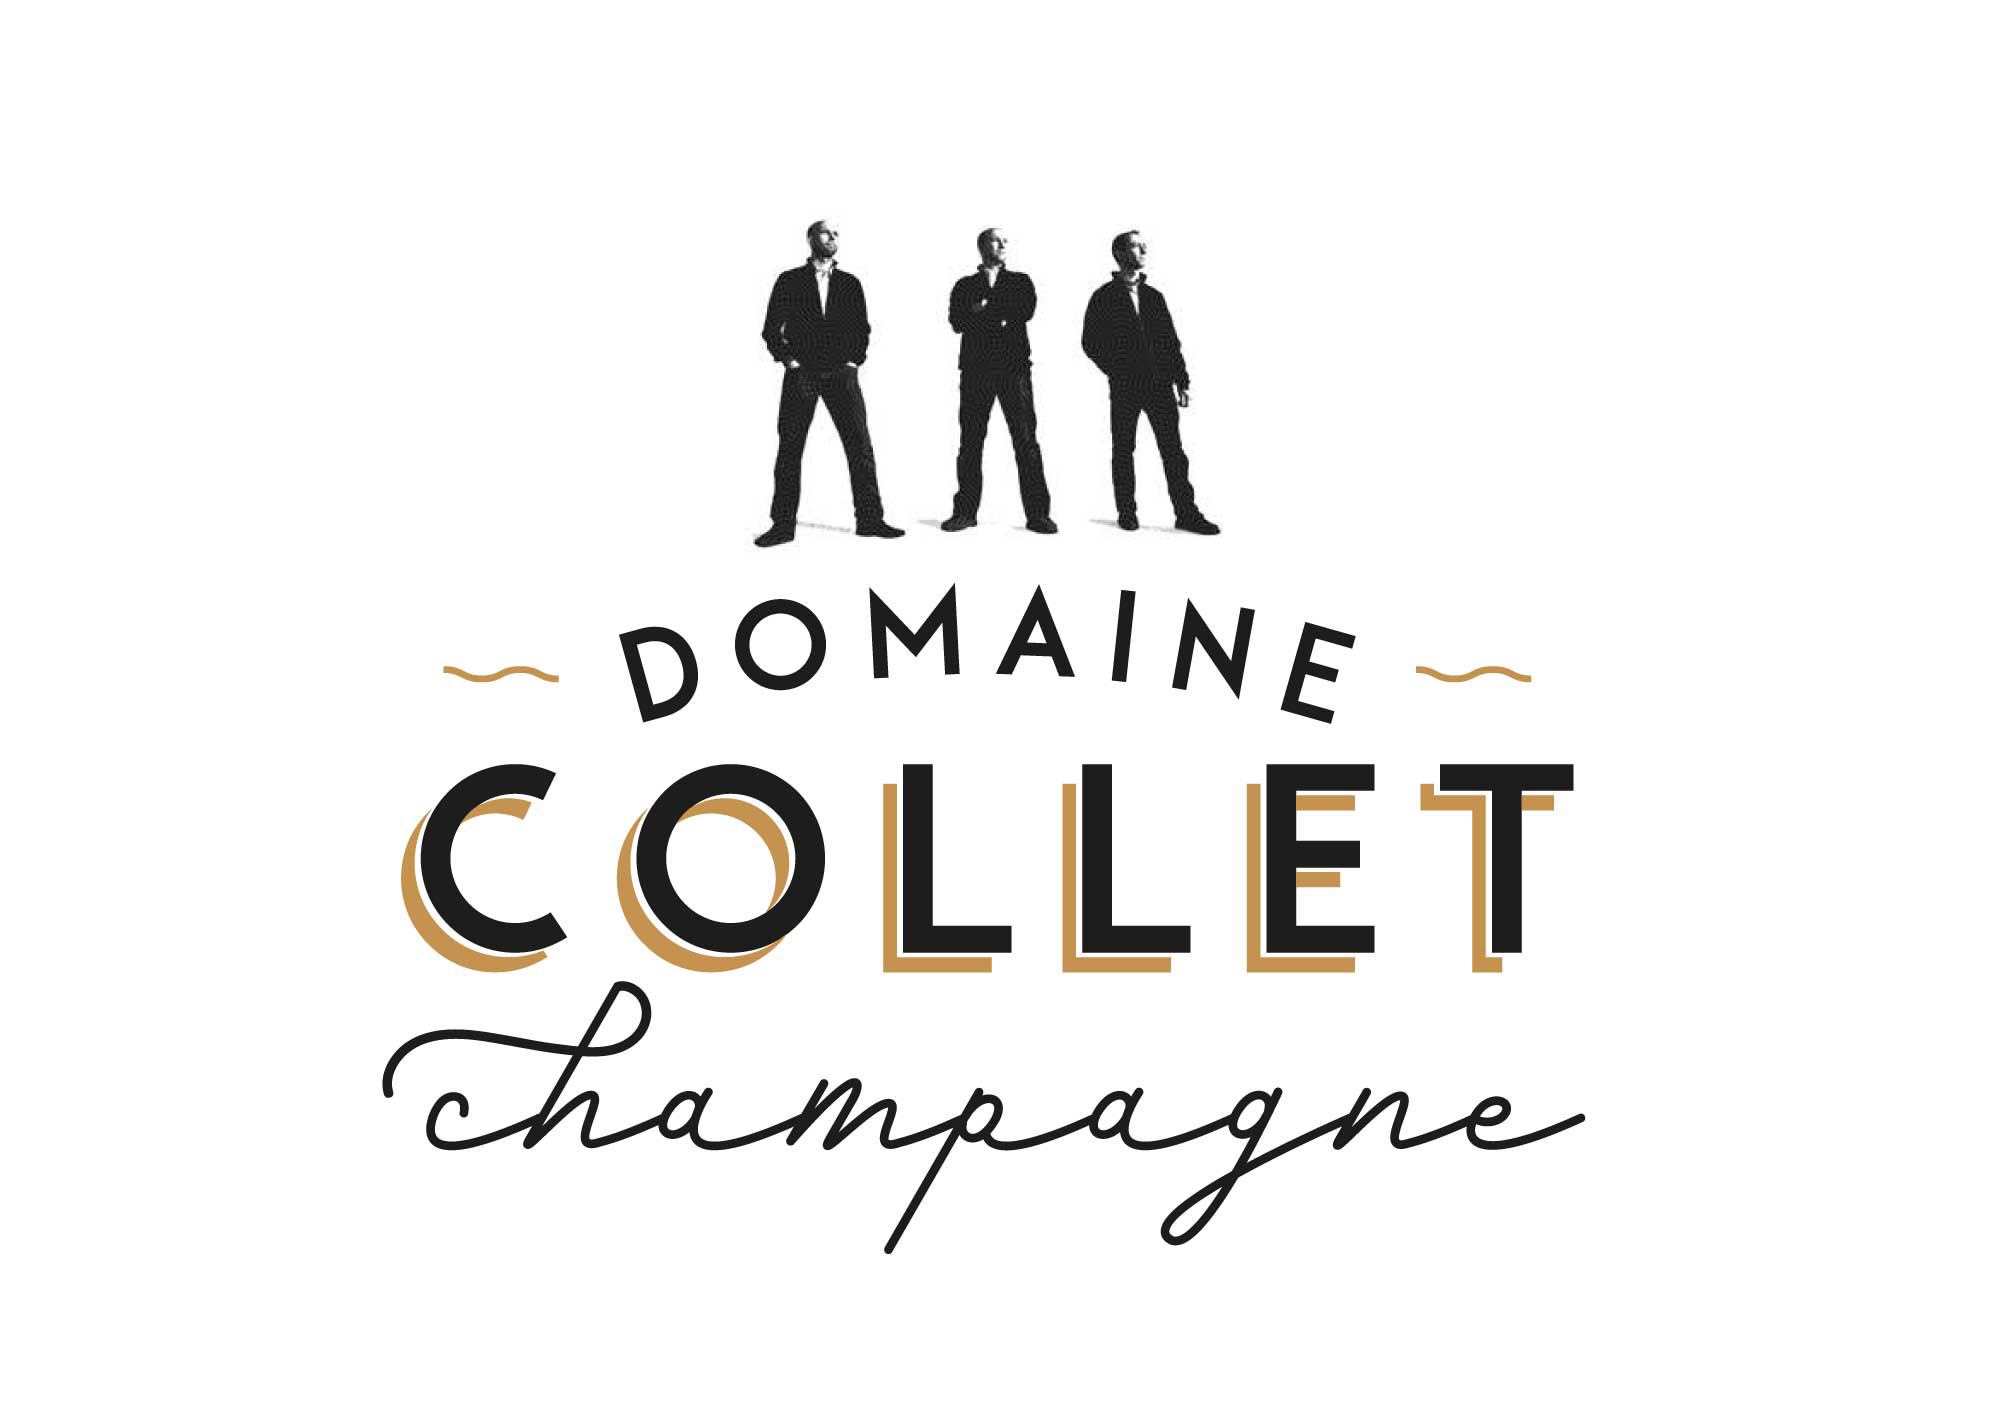 Domaine Collet Champagne